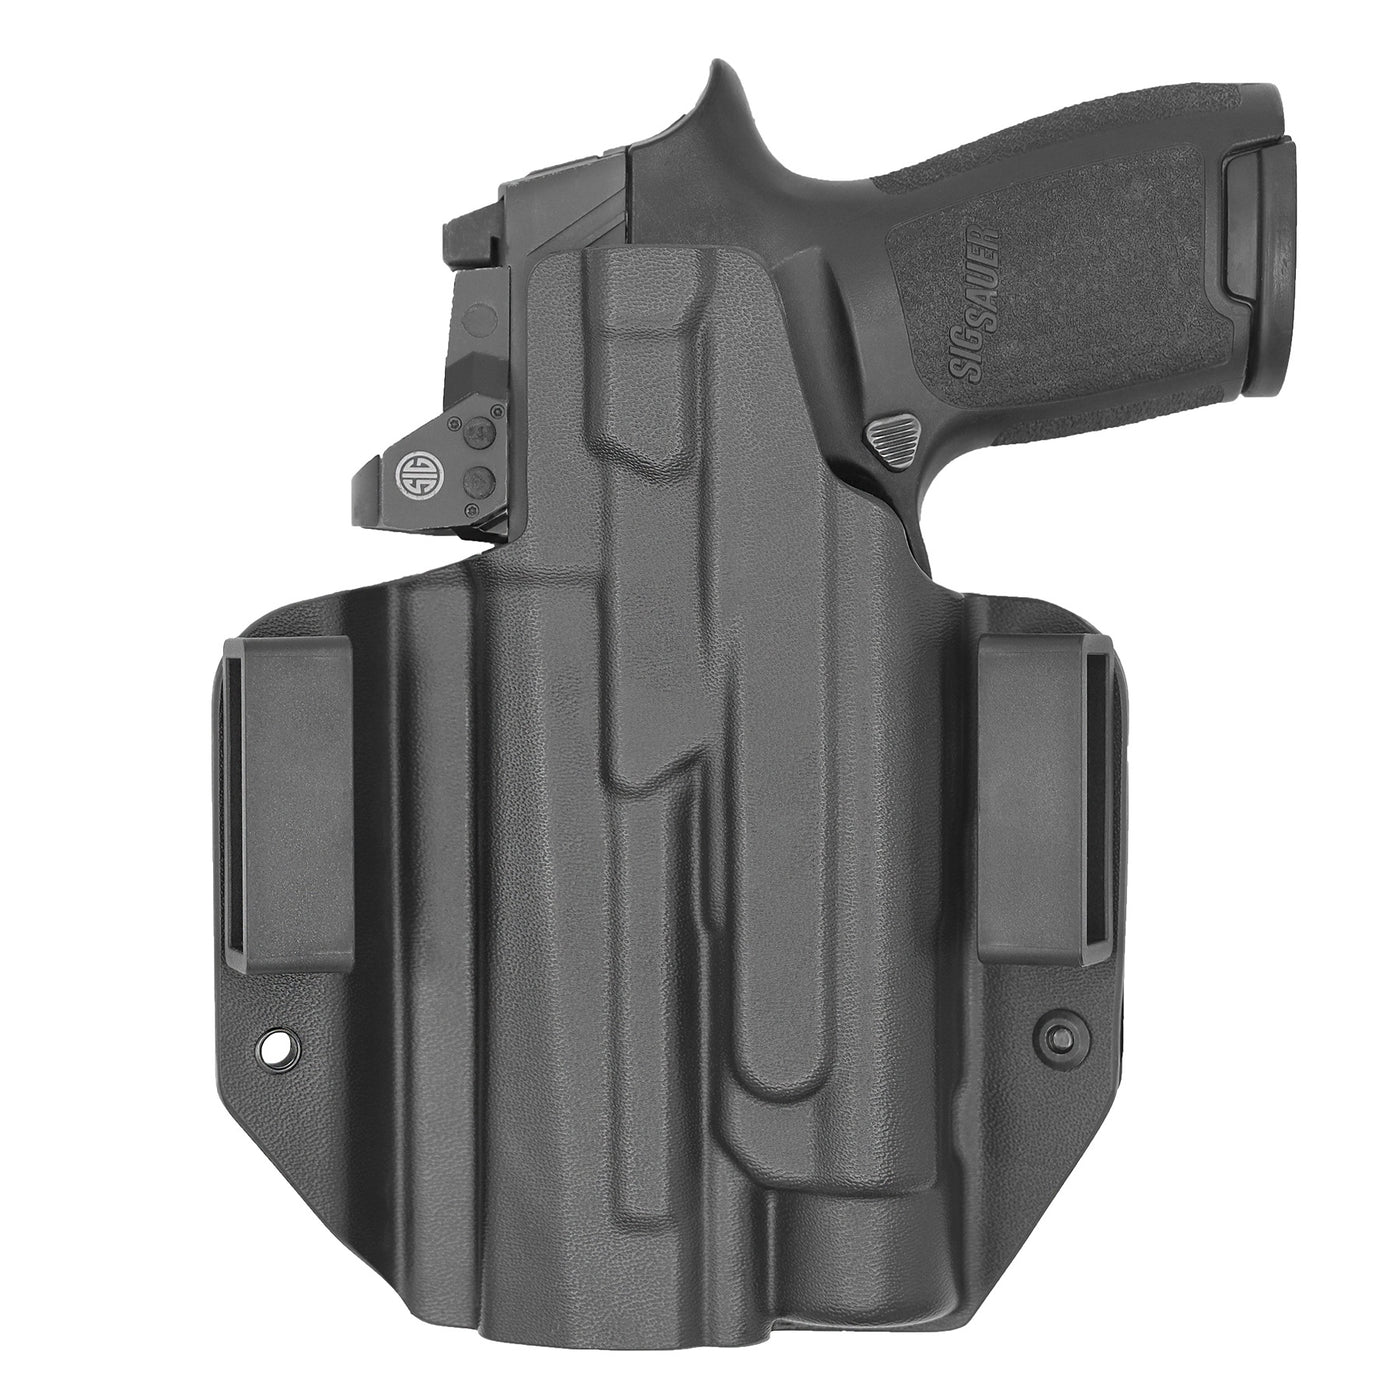 C&G Holsters Quickship OWB Tactical Masada Streamlight TLR1 in holstered position back view